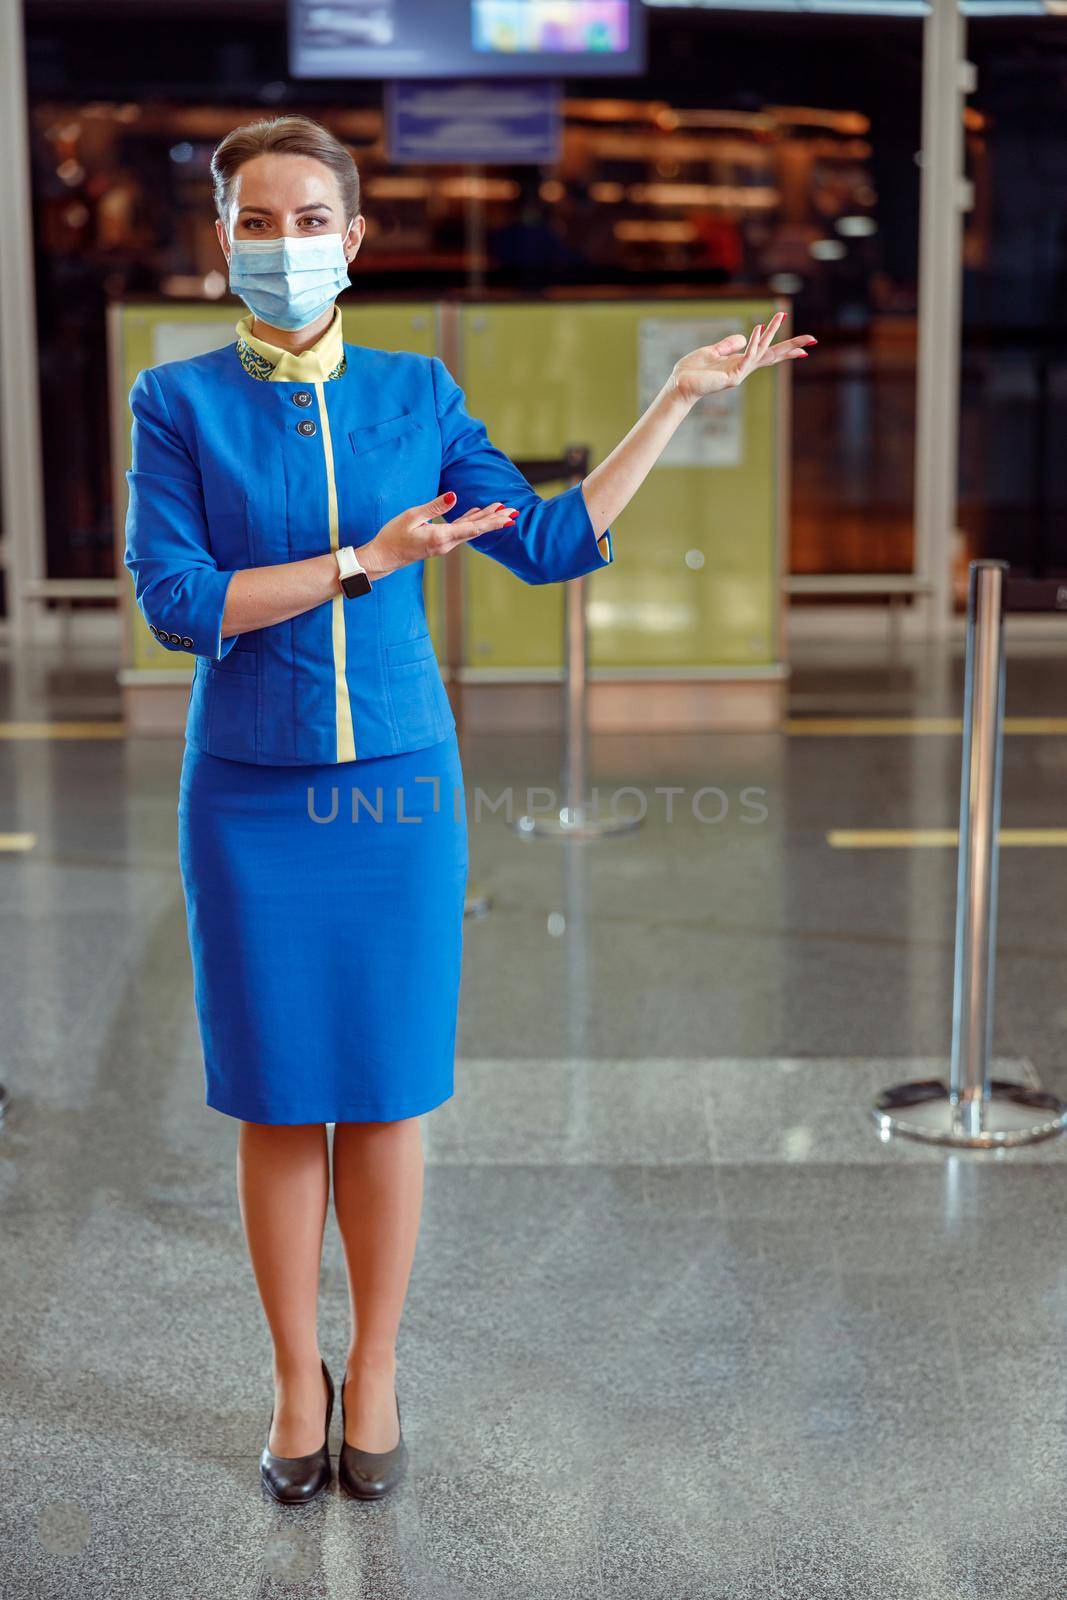 Female flight attendant wearing protective face mask and air hostess uniform while pointing at something in airport terminal